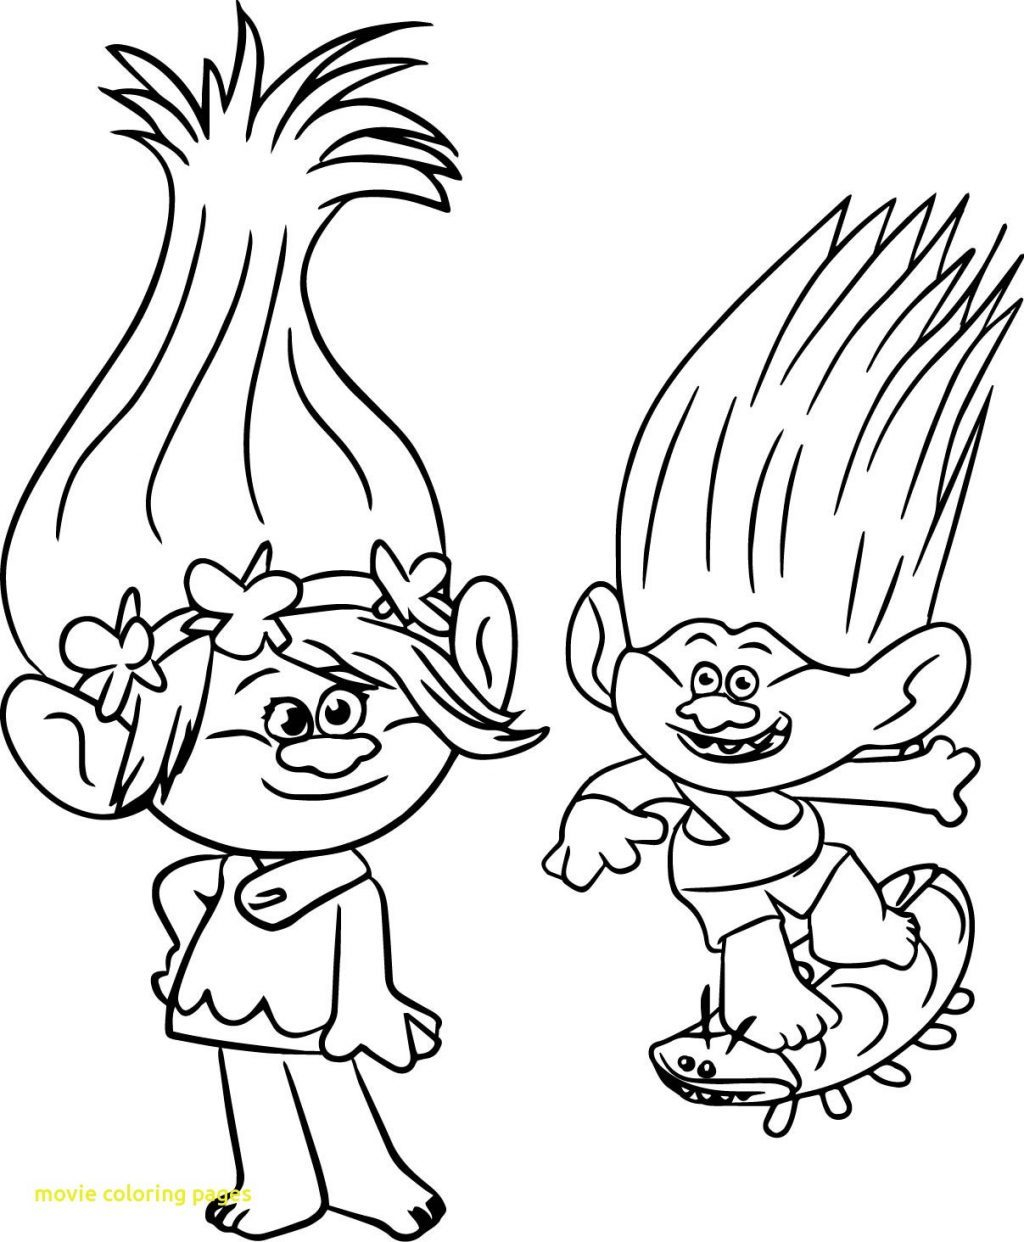 Trolls Movie Coloring Pages Coloring Pages Free Trolls Coloring Pages To Print 8x10 Template